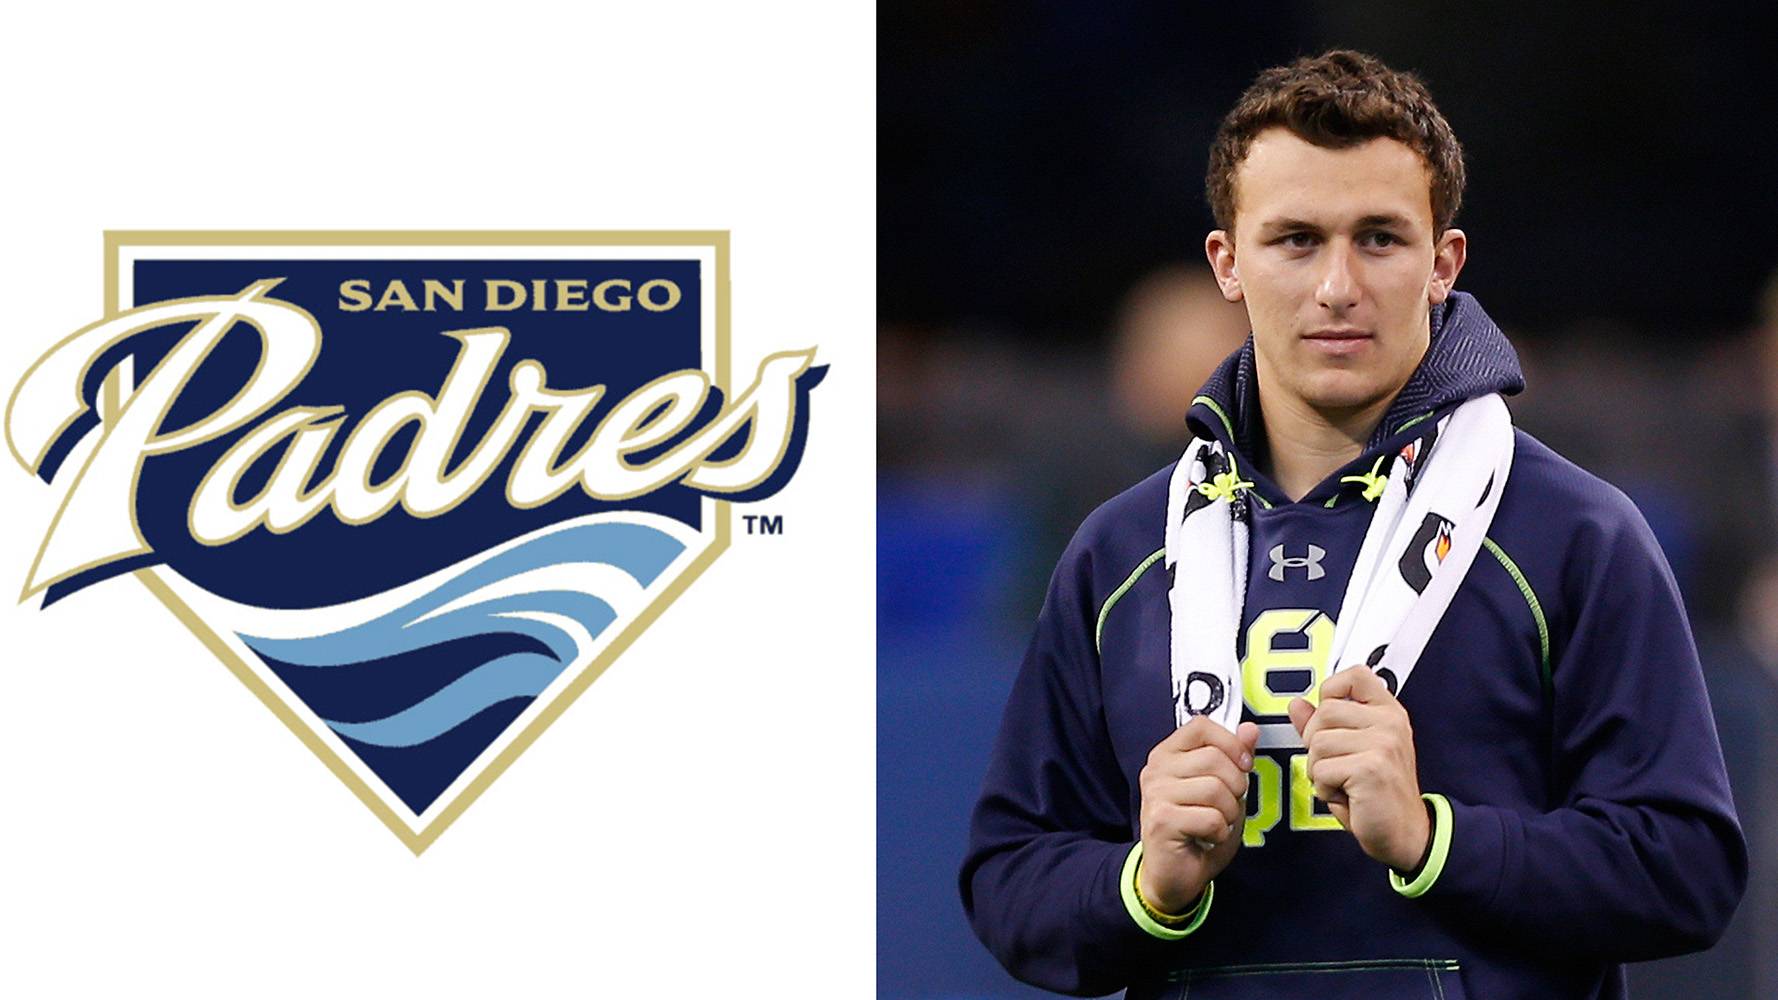 Johnny Manziel was the 28th Round pick of the Padres in 2014